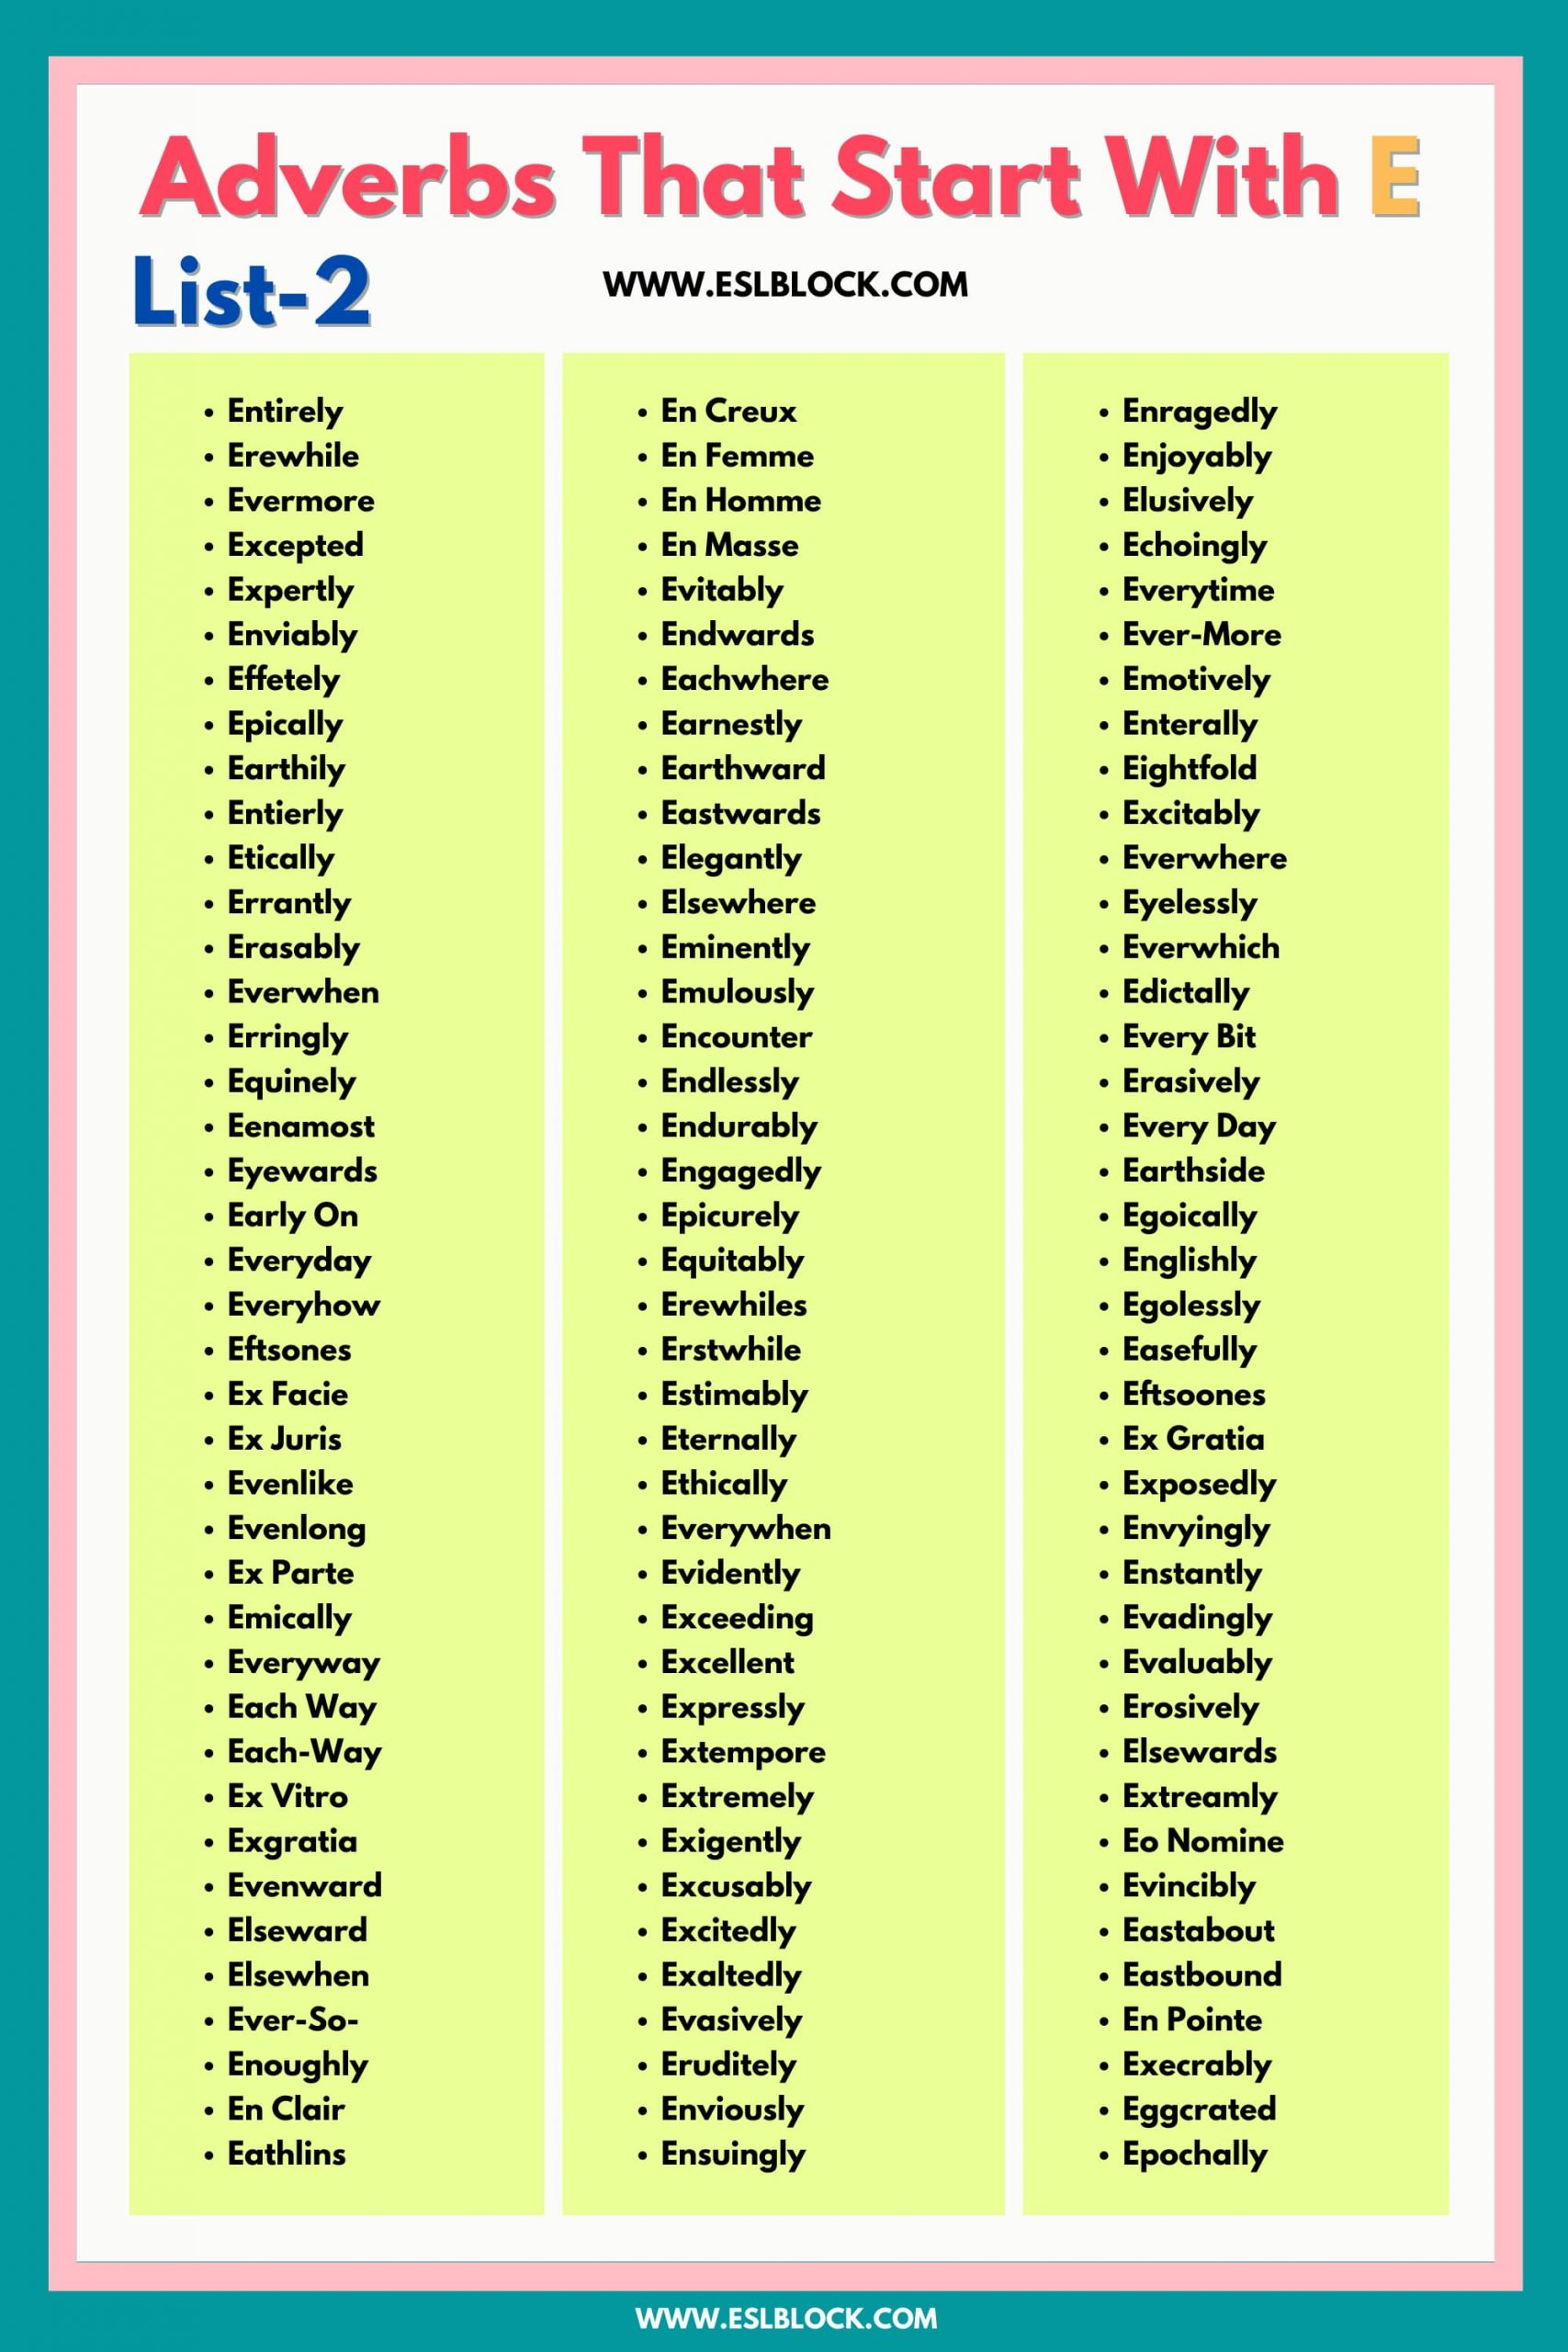 100 Example Sentences Using Adverbs, 4 Letter Adverbs That Start with E, 4 Letter Words, 5 Letter Adverbs That Start with E, 5 Letter Words, 6 Letter Adverbs That Start with E, 6 Letter Words, A to Z Adverbs, AA Adverbs, Adverb vocabulary words, Adverbs, Adverbs That Start with E, Adverbs with Example Sentences, All Adverbs, Types of Adverbs, Types of Adverbs with Example Sentences, Vocabulary, What are Adverbs, What are the types of Adverbs, Words That with E